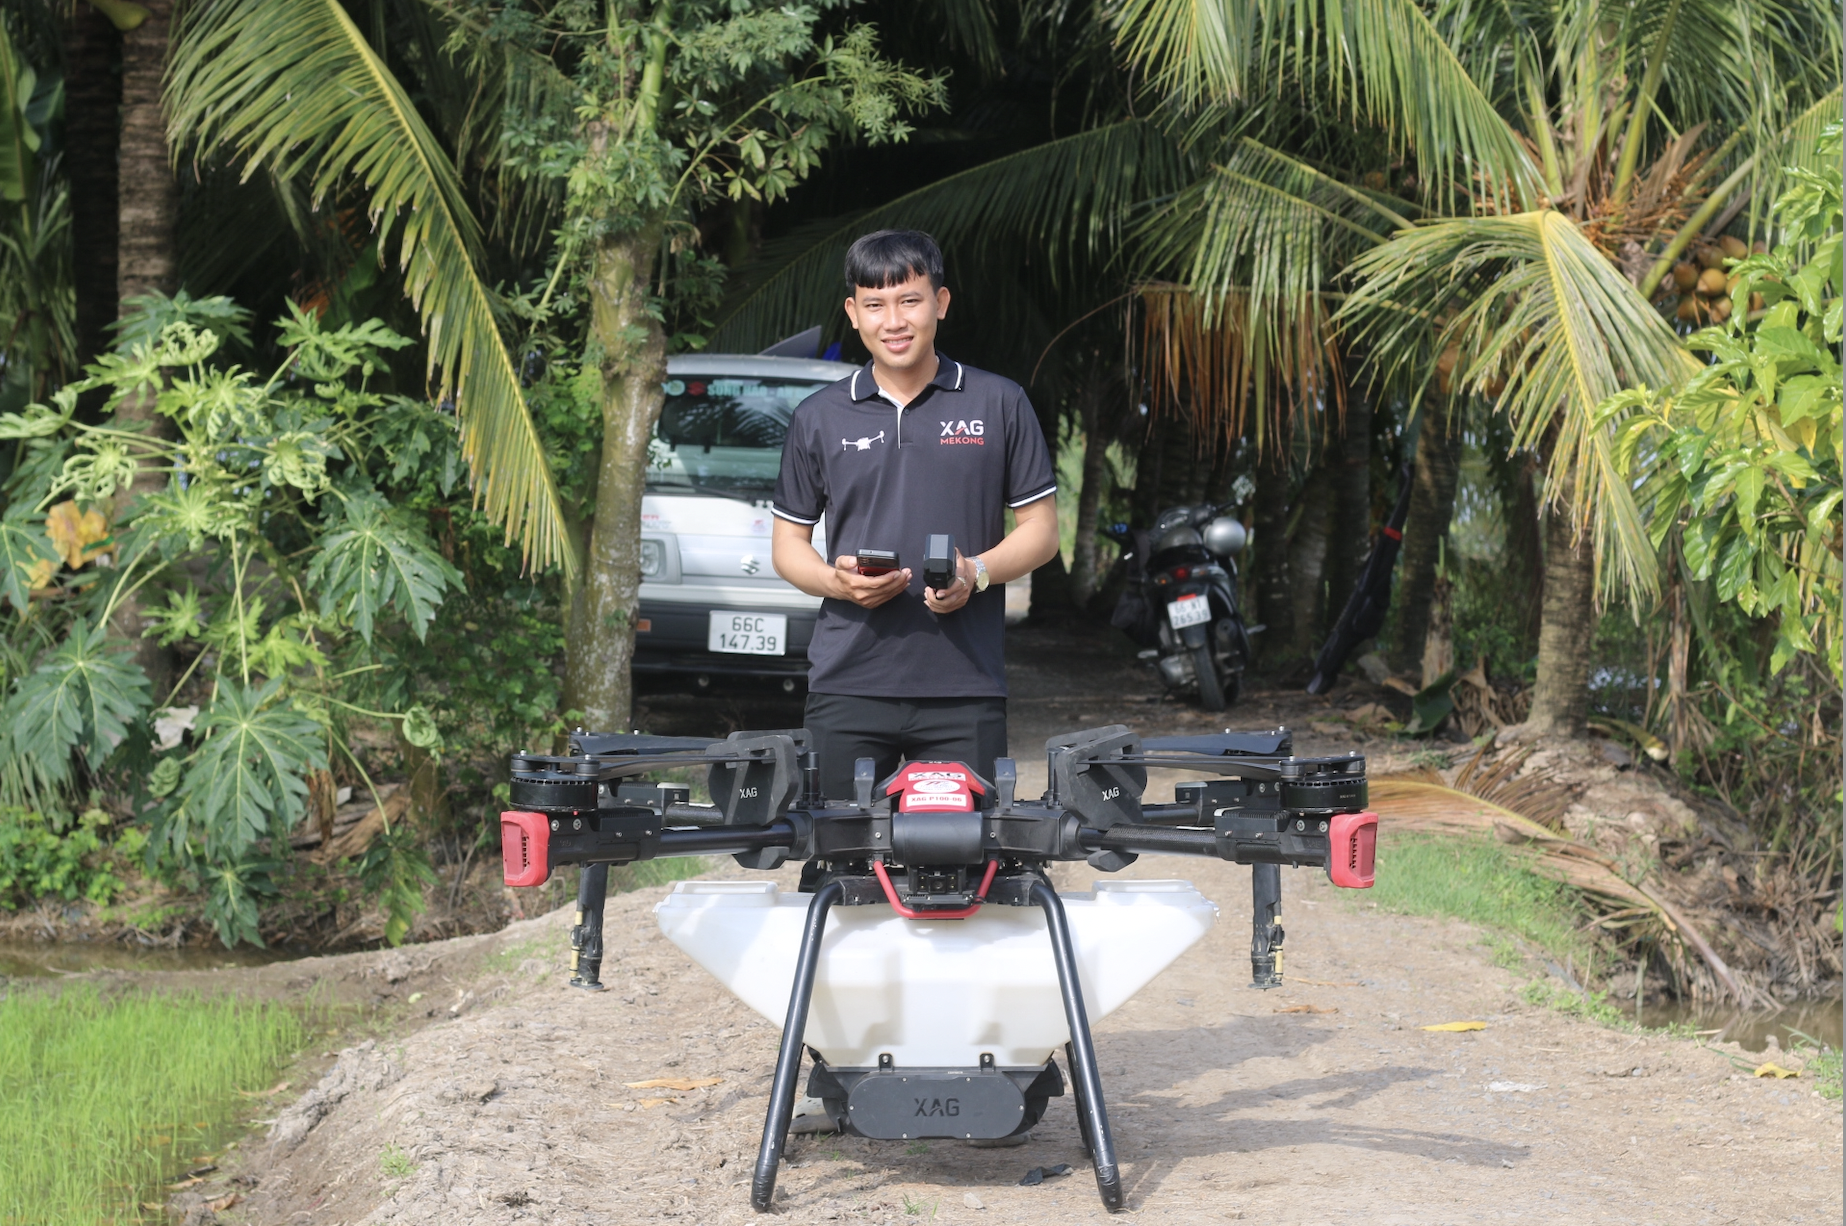 Tran Minh Man and his XAG P100 Agricultural Drone